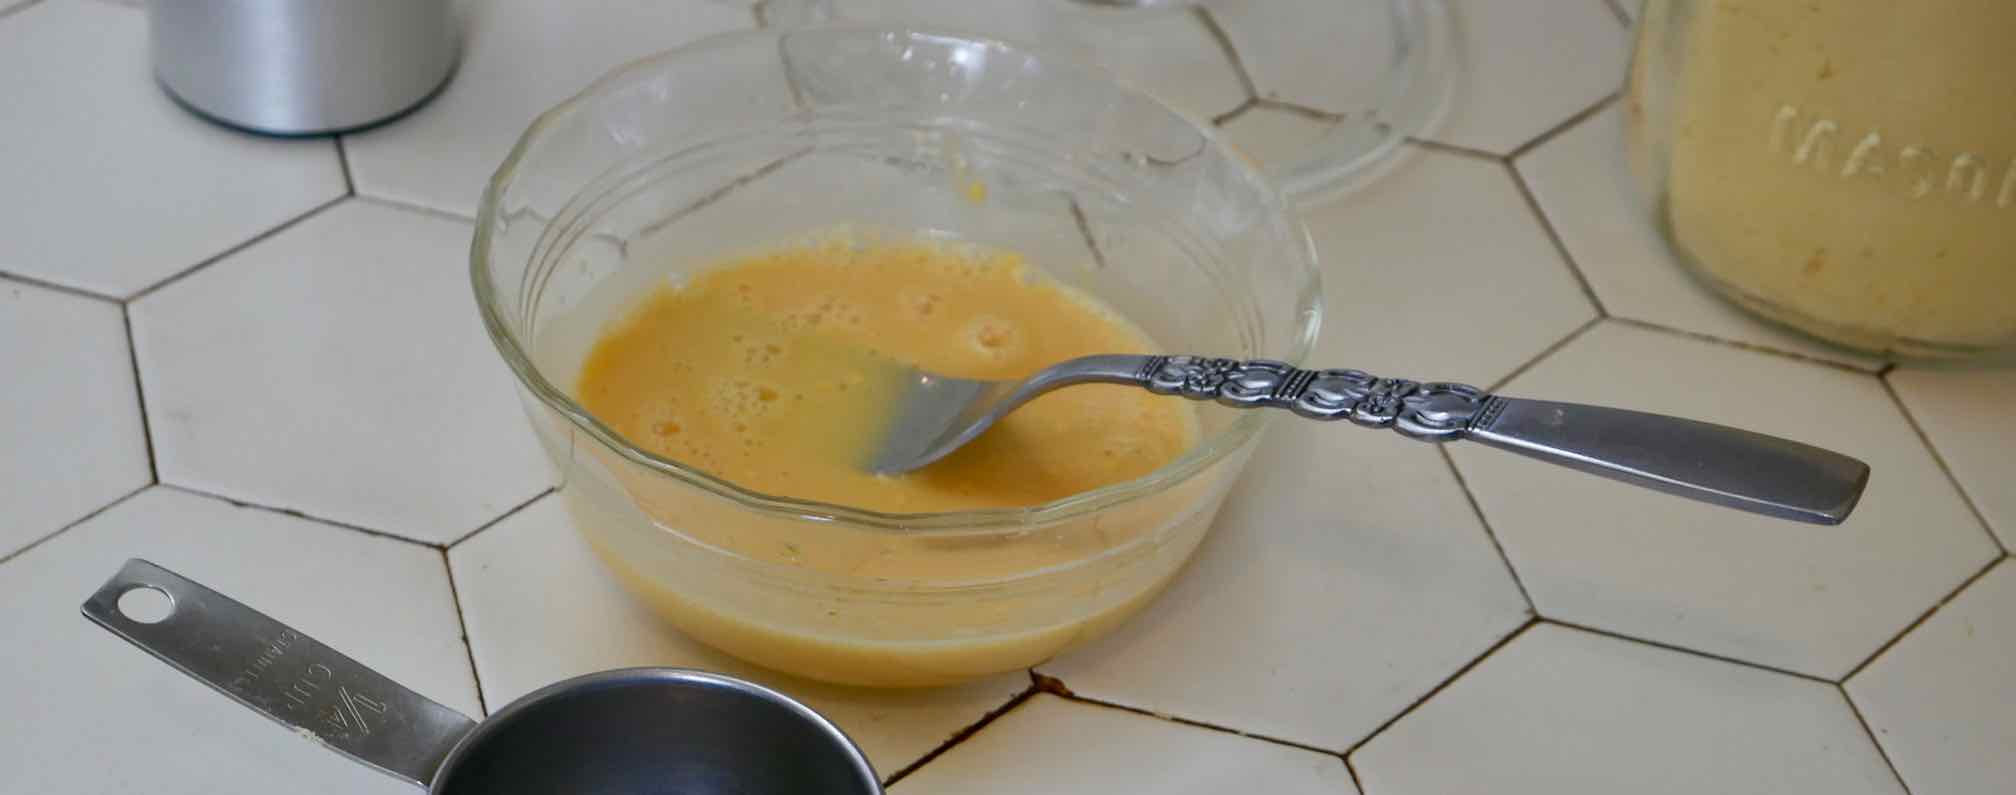 dried egg powder being mixed  with water using a fork